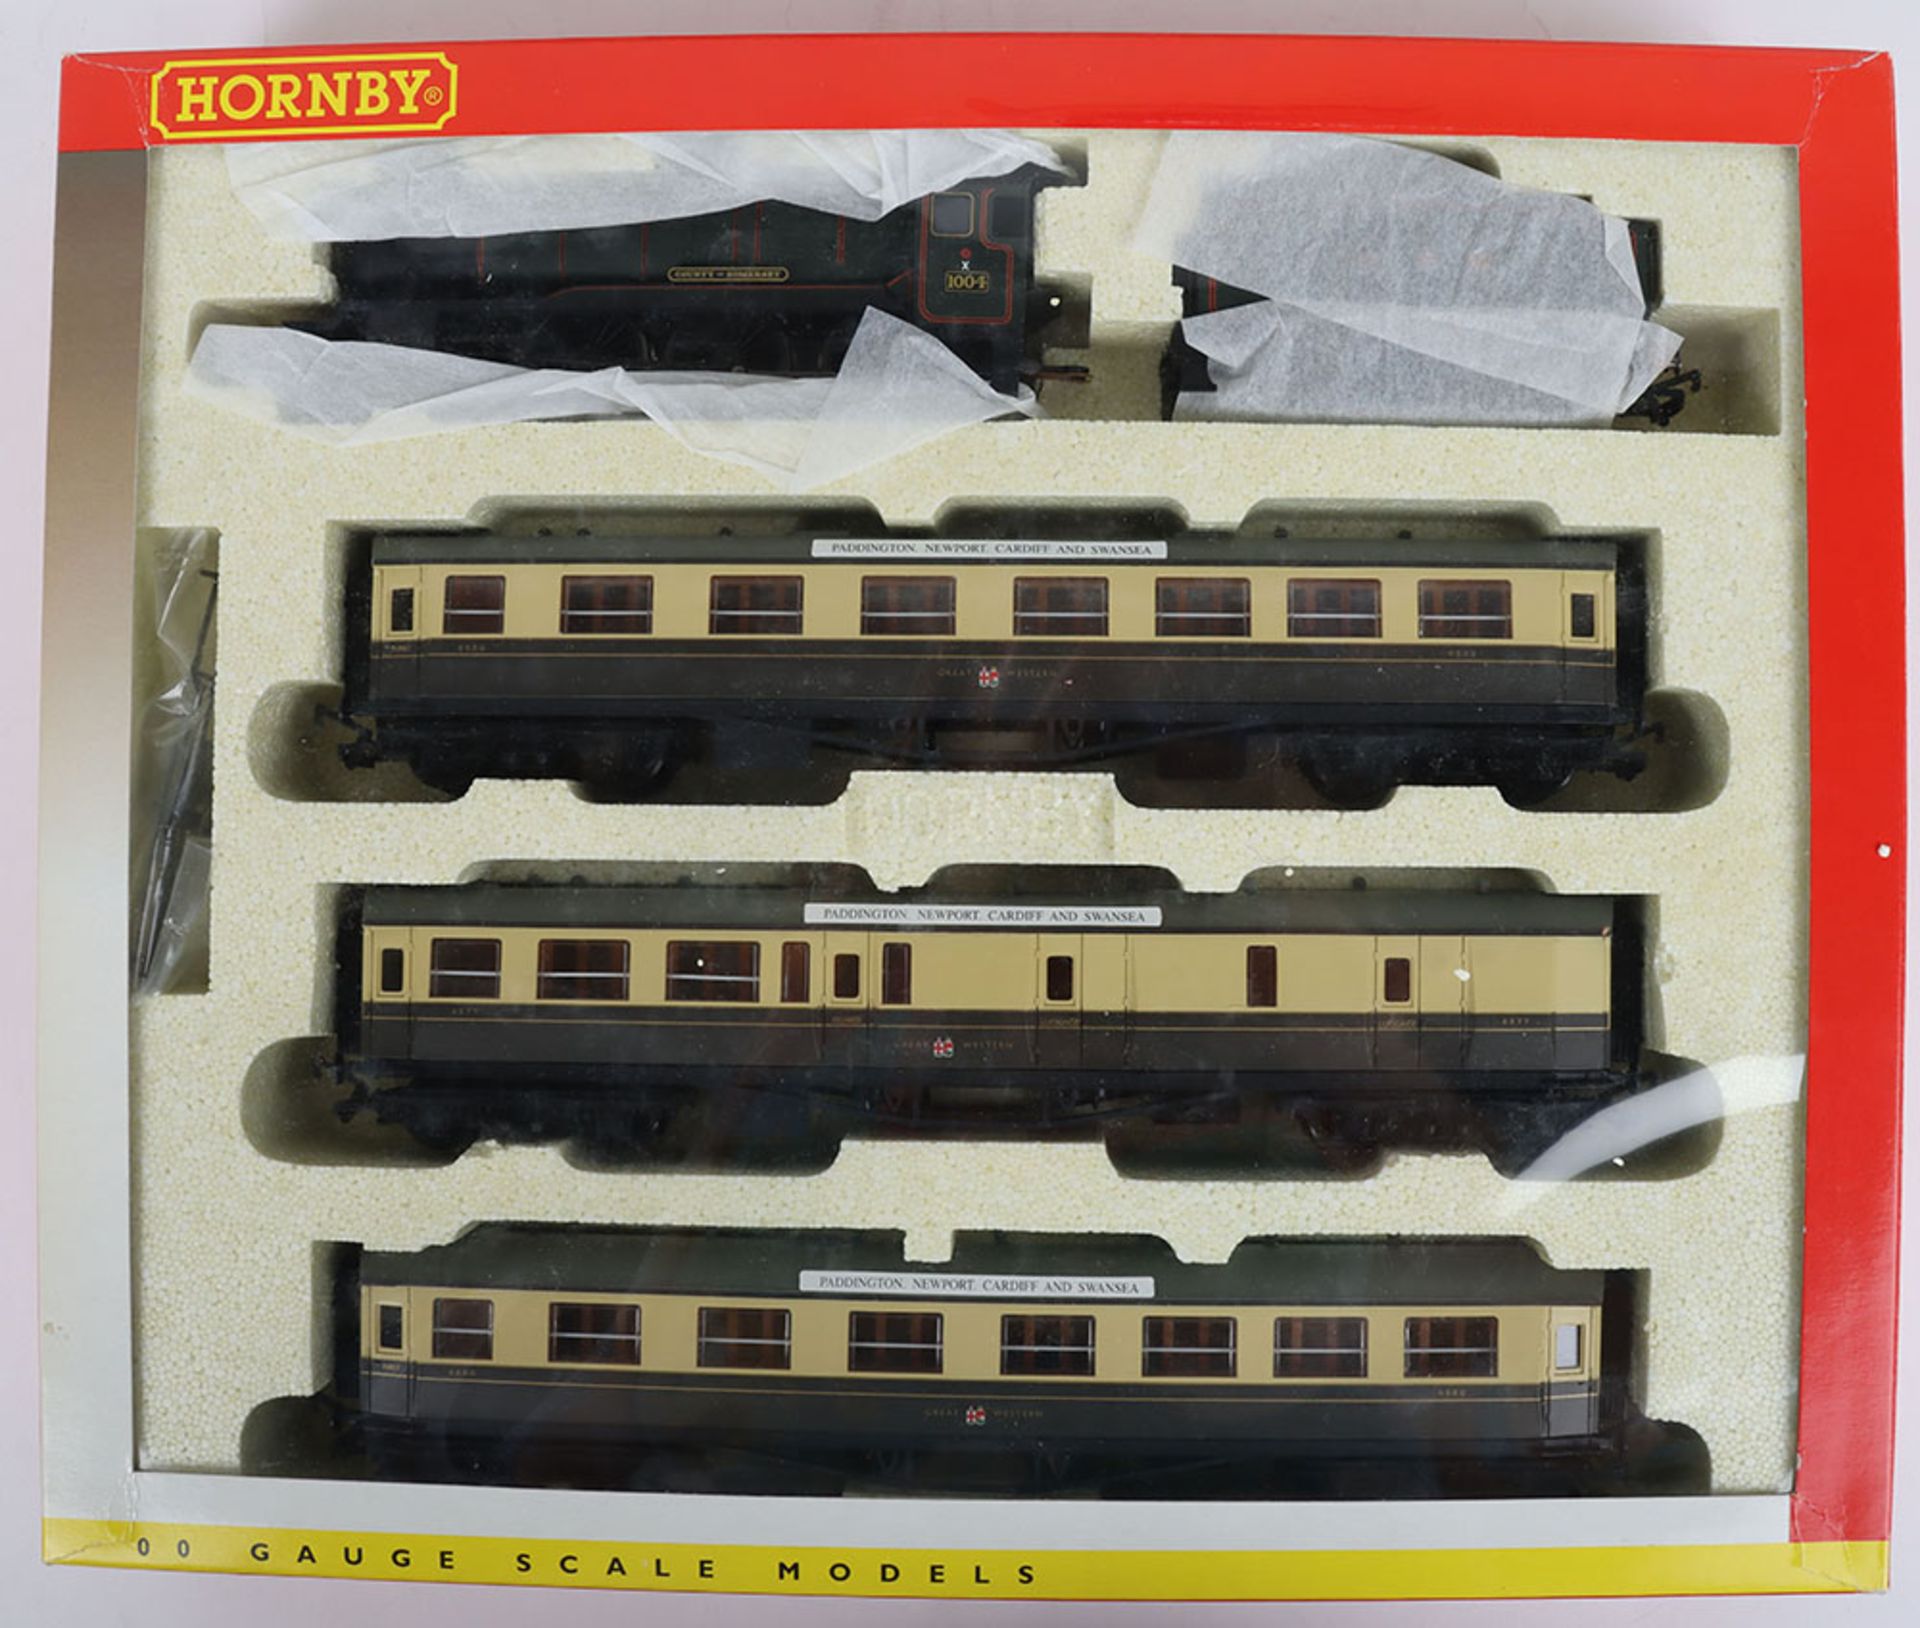 Hornby R2025 Great Western Express Passenger Train set - Image 3 of 3